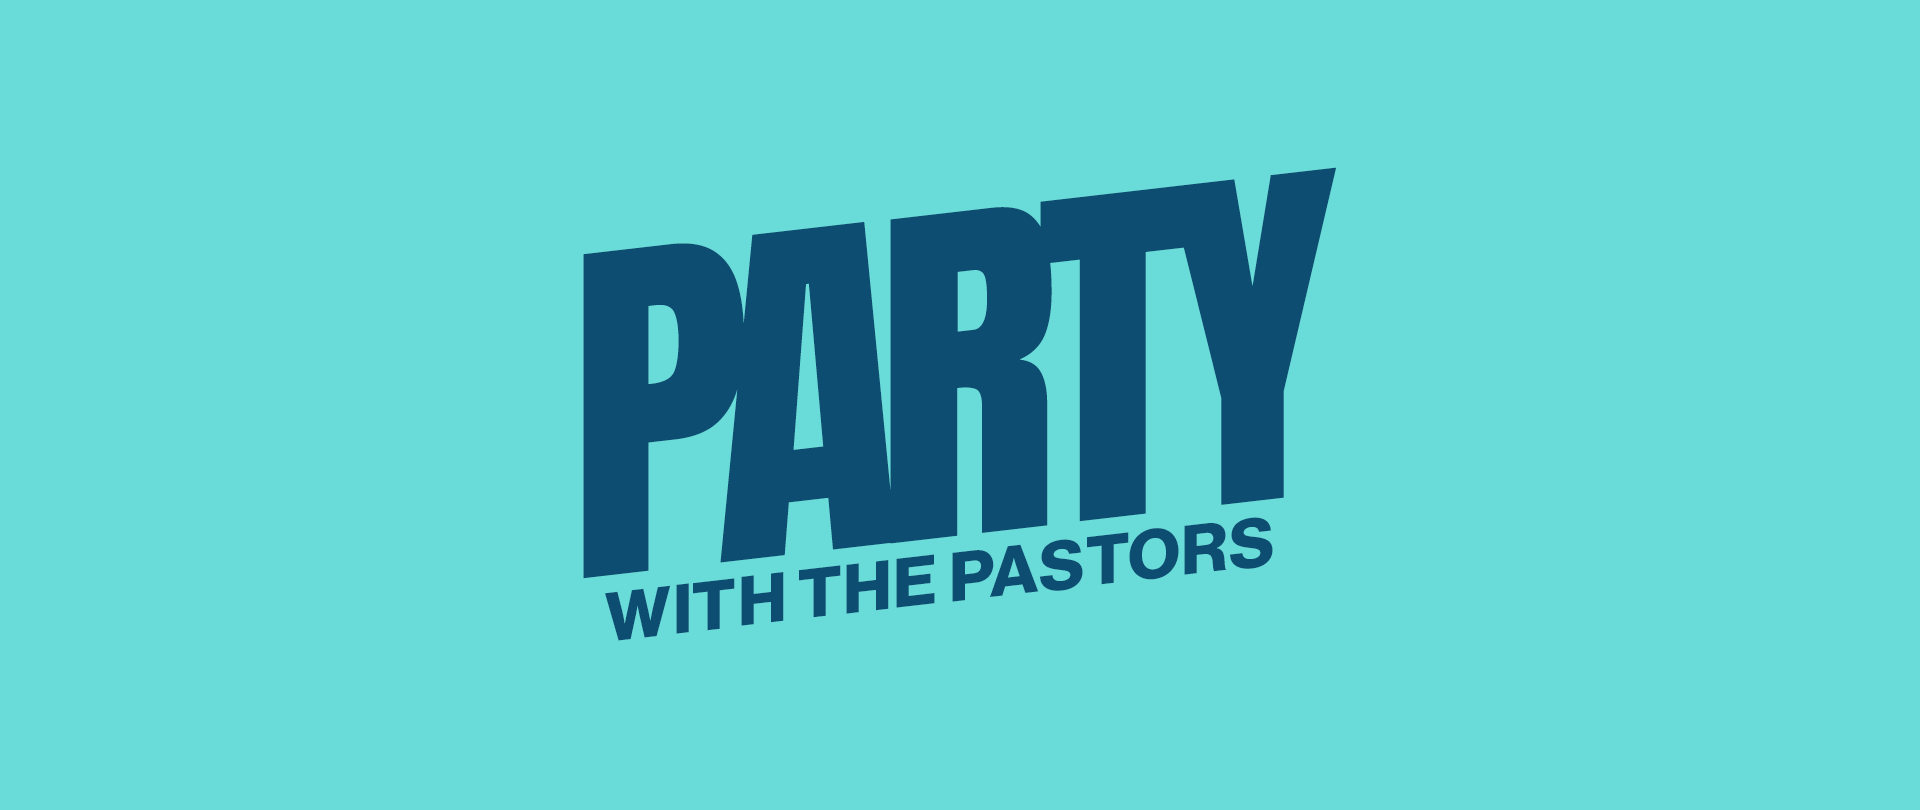 party-with-the-pastors-1920x810-2